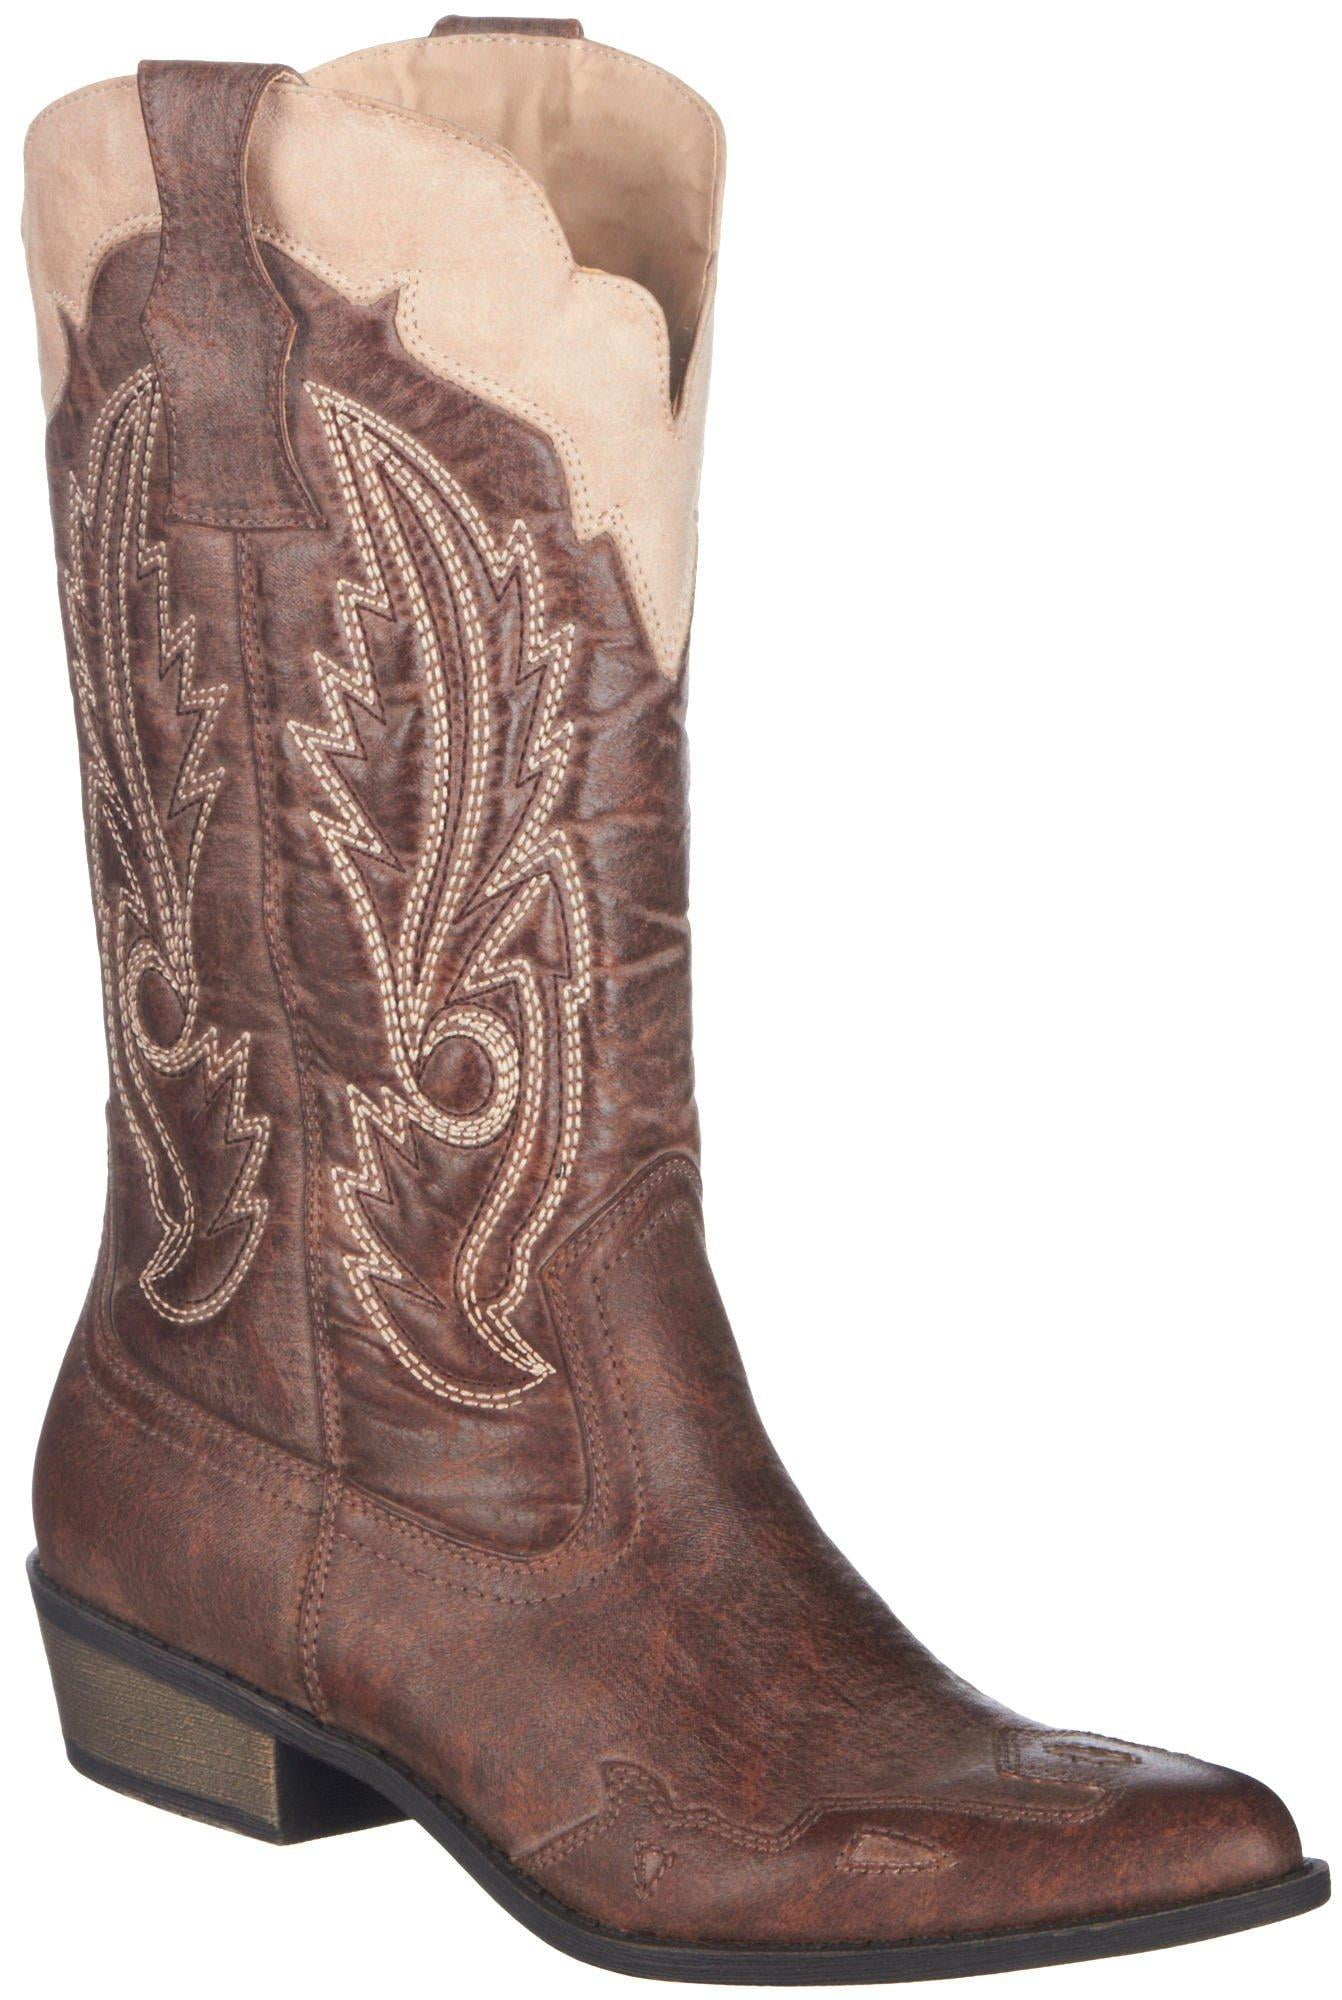 Coconuts by Matisse Cimmaron Cowboy Western Boot,Brown/Brown,8.5